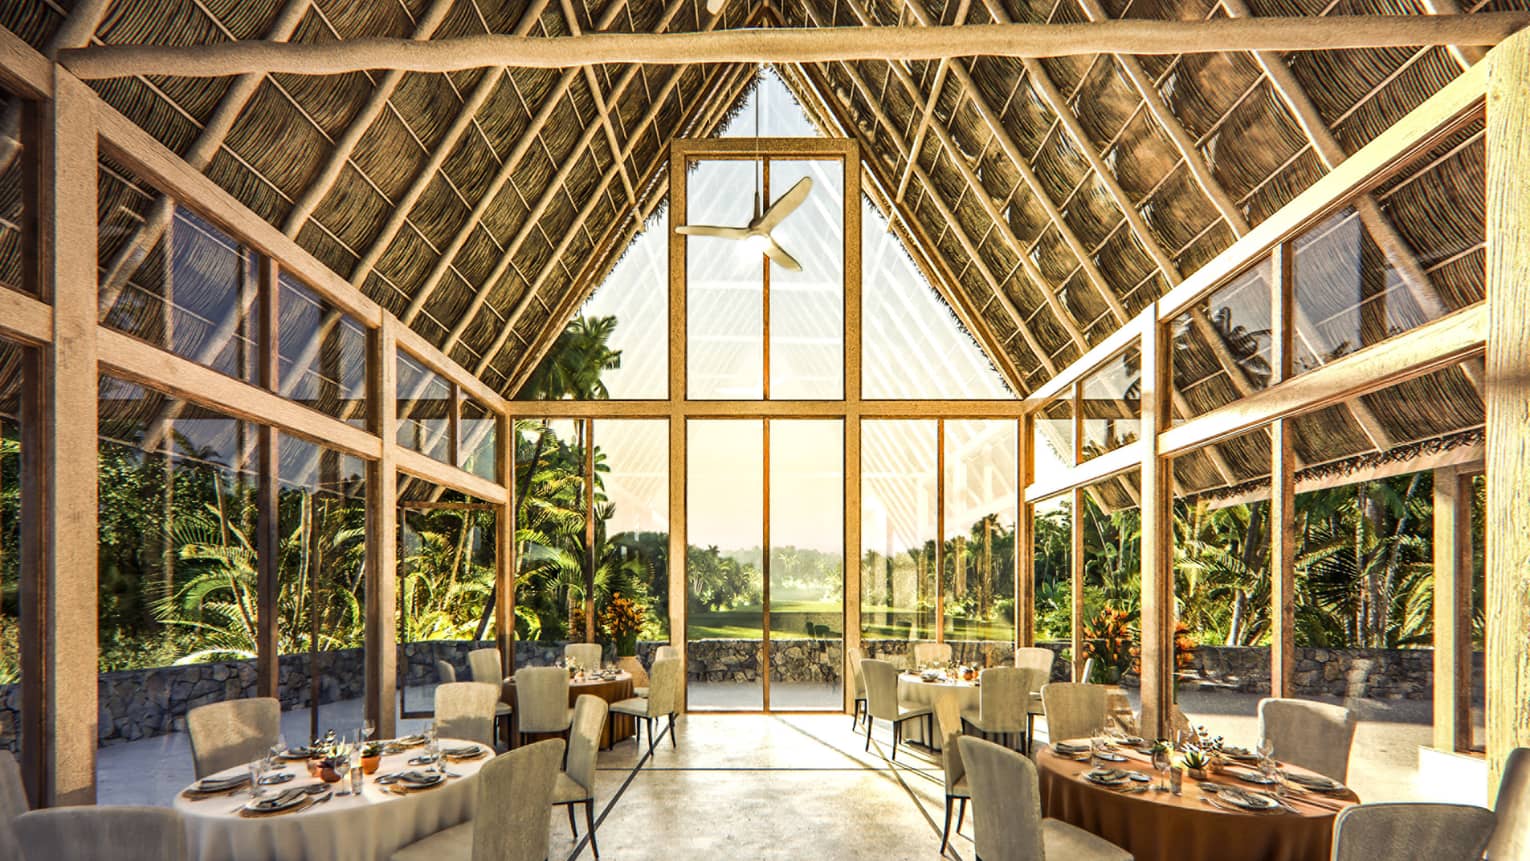 Pitched thatched-roof event room with walls of windows